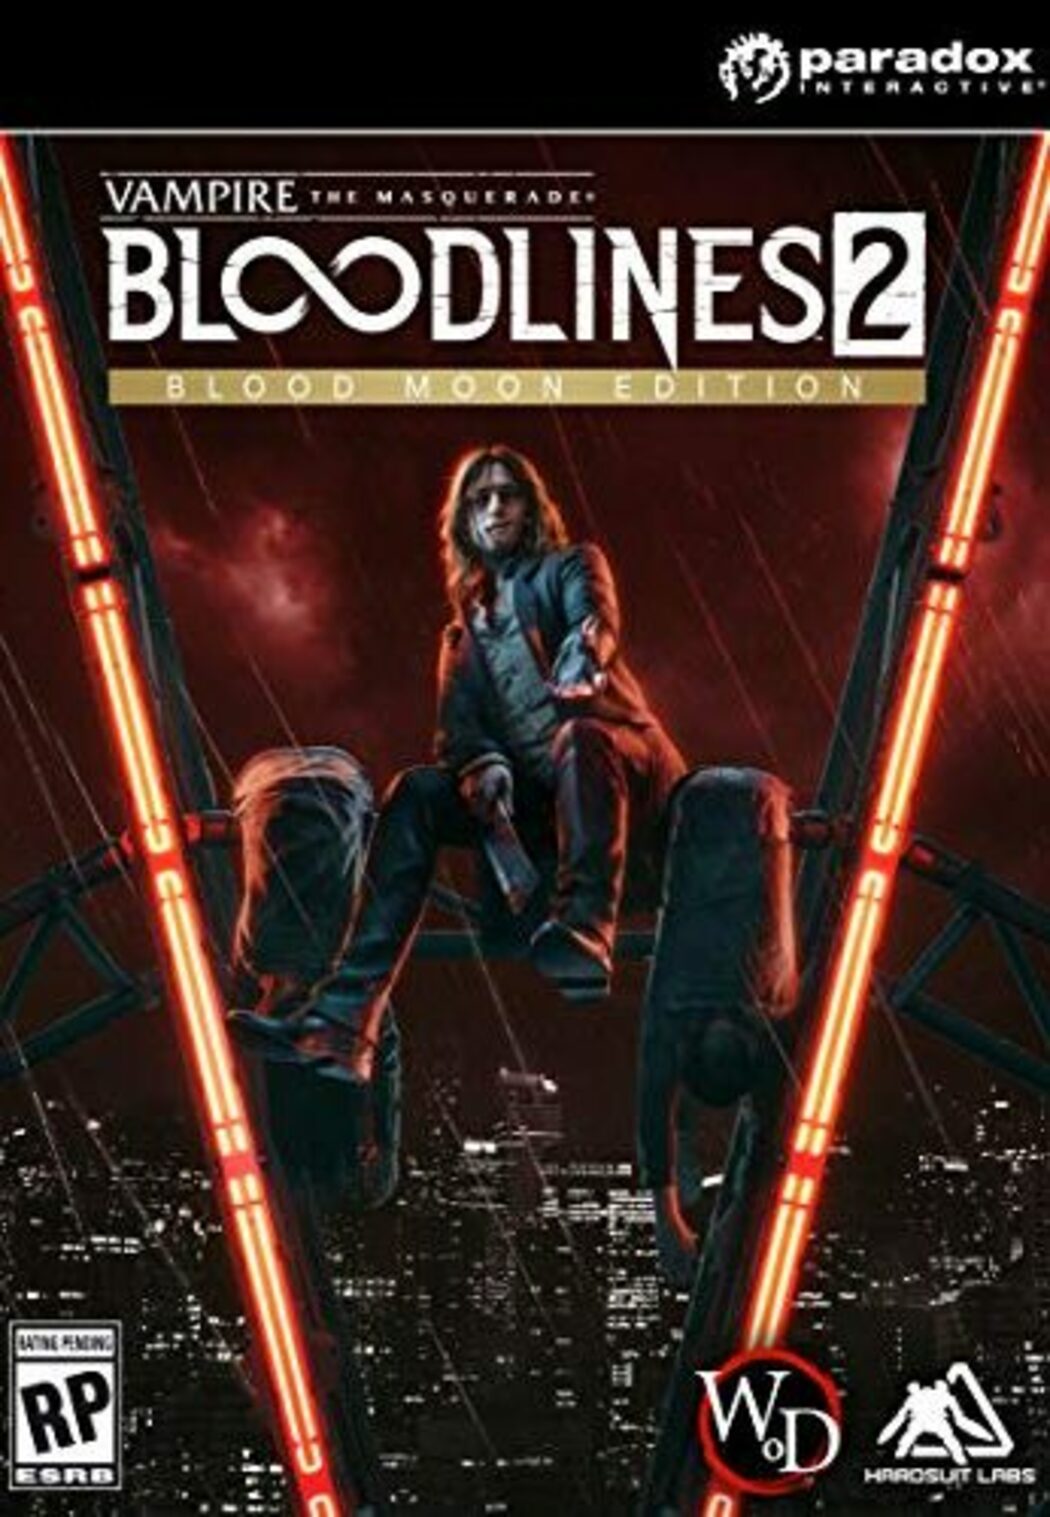 Vampire The Masquerade: Bloodlines 2 First Blood Edition - Xbox One 